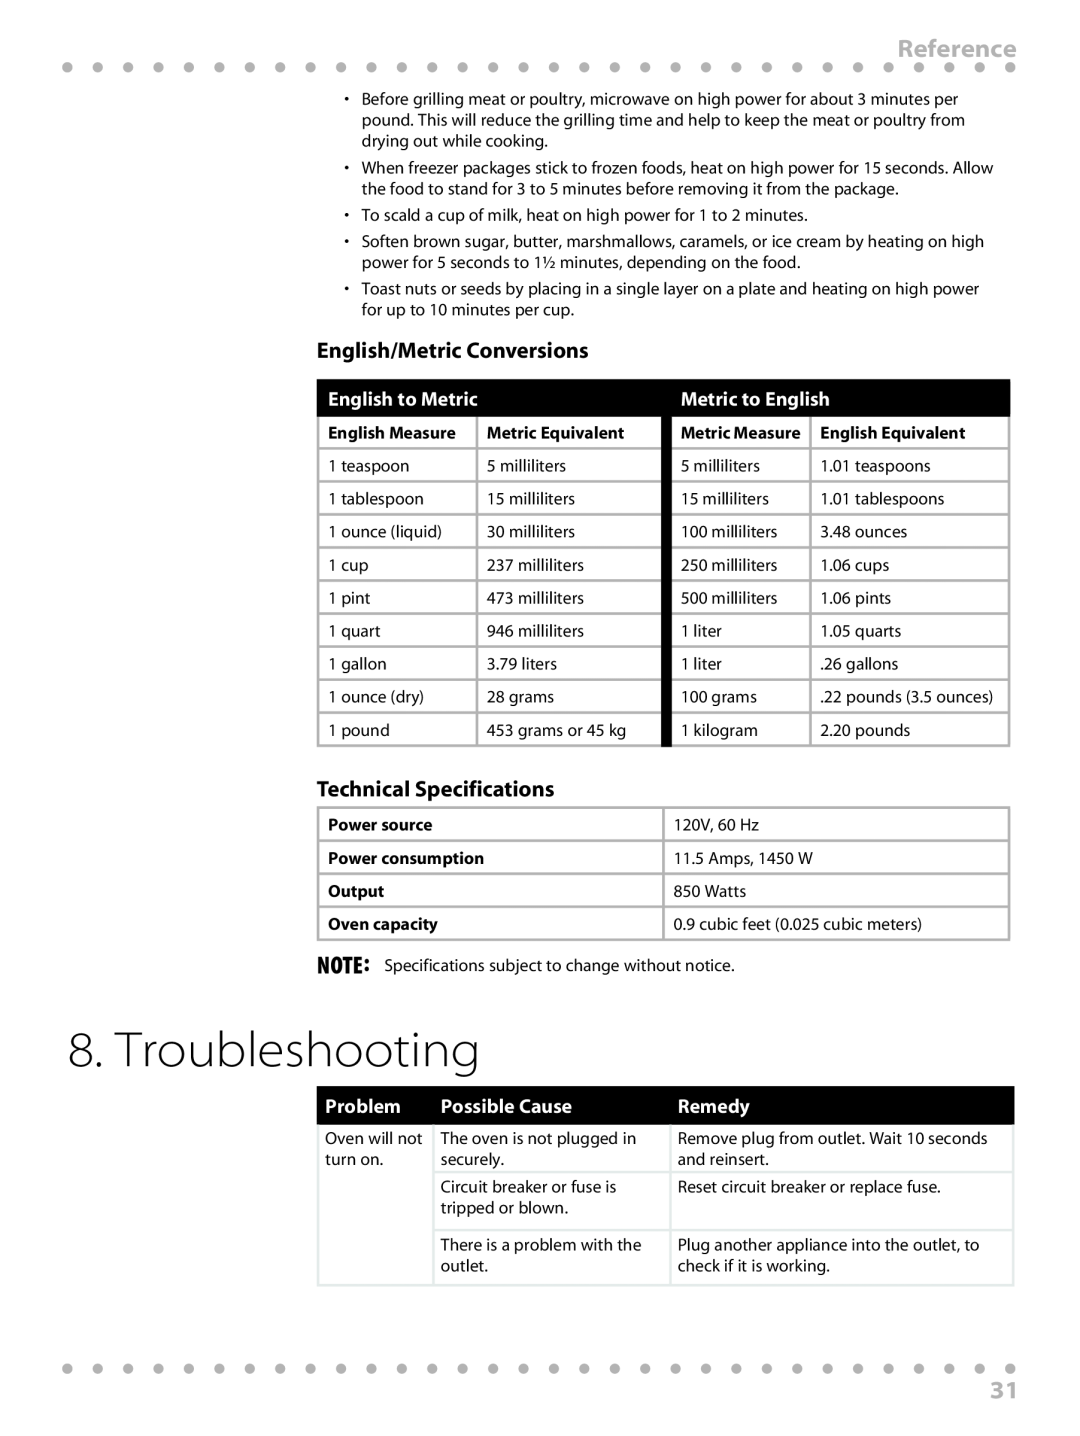 Toastmaster WBYMW1 manual Troubleshooting, Reference, English to Metric, Metric to English, Problem, Remedy, Possible Cause 